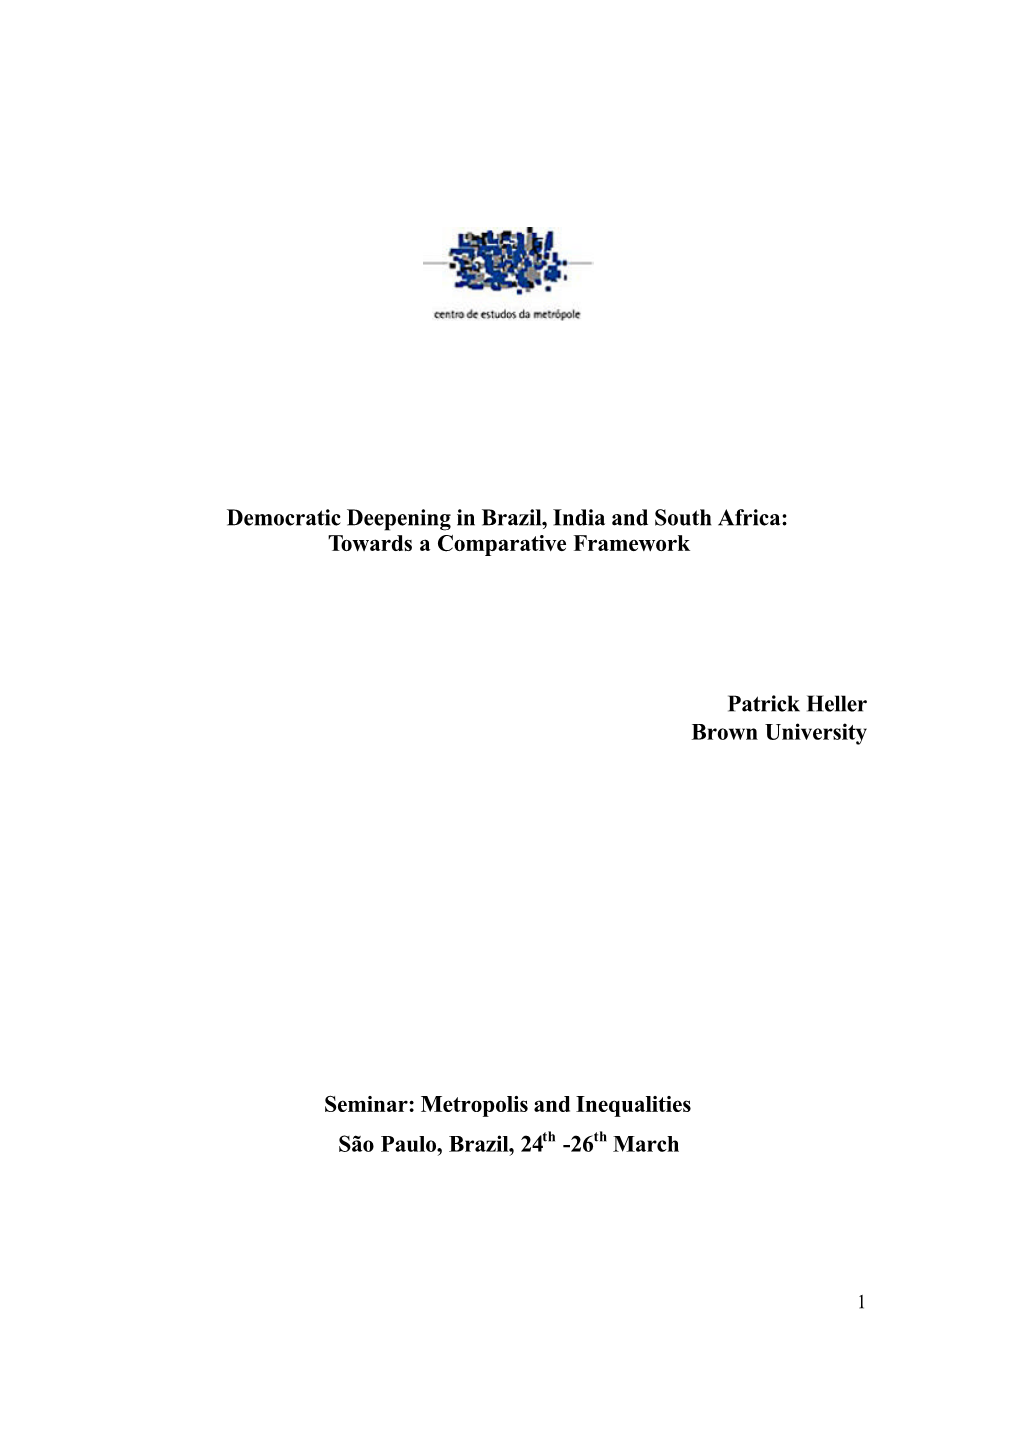 Democratic Deepening in Brazil, India and South Africa: Towards a Comparative Framework